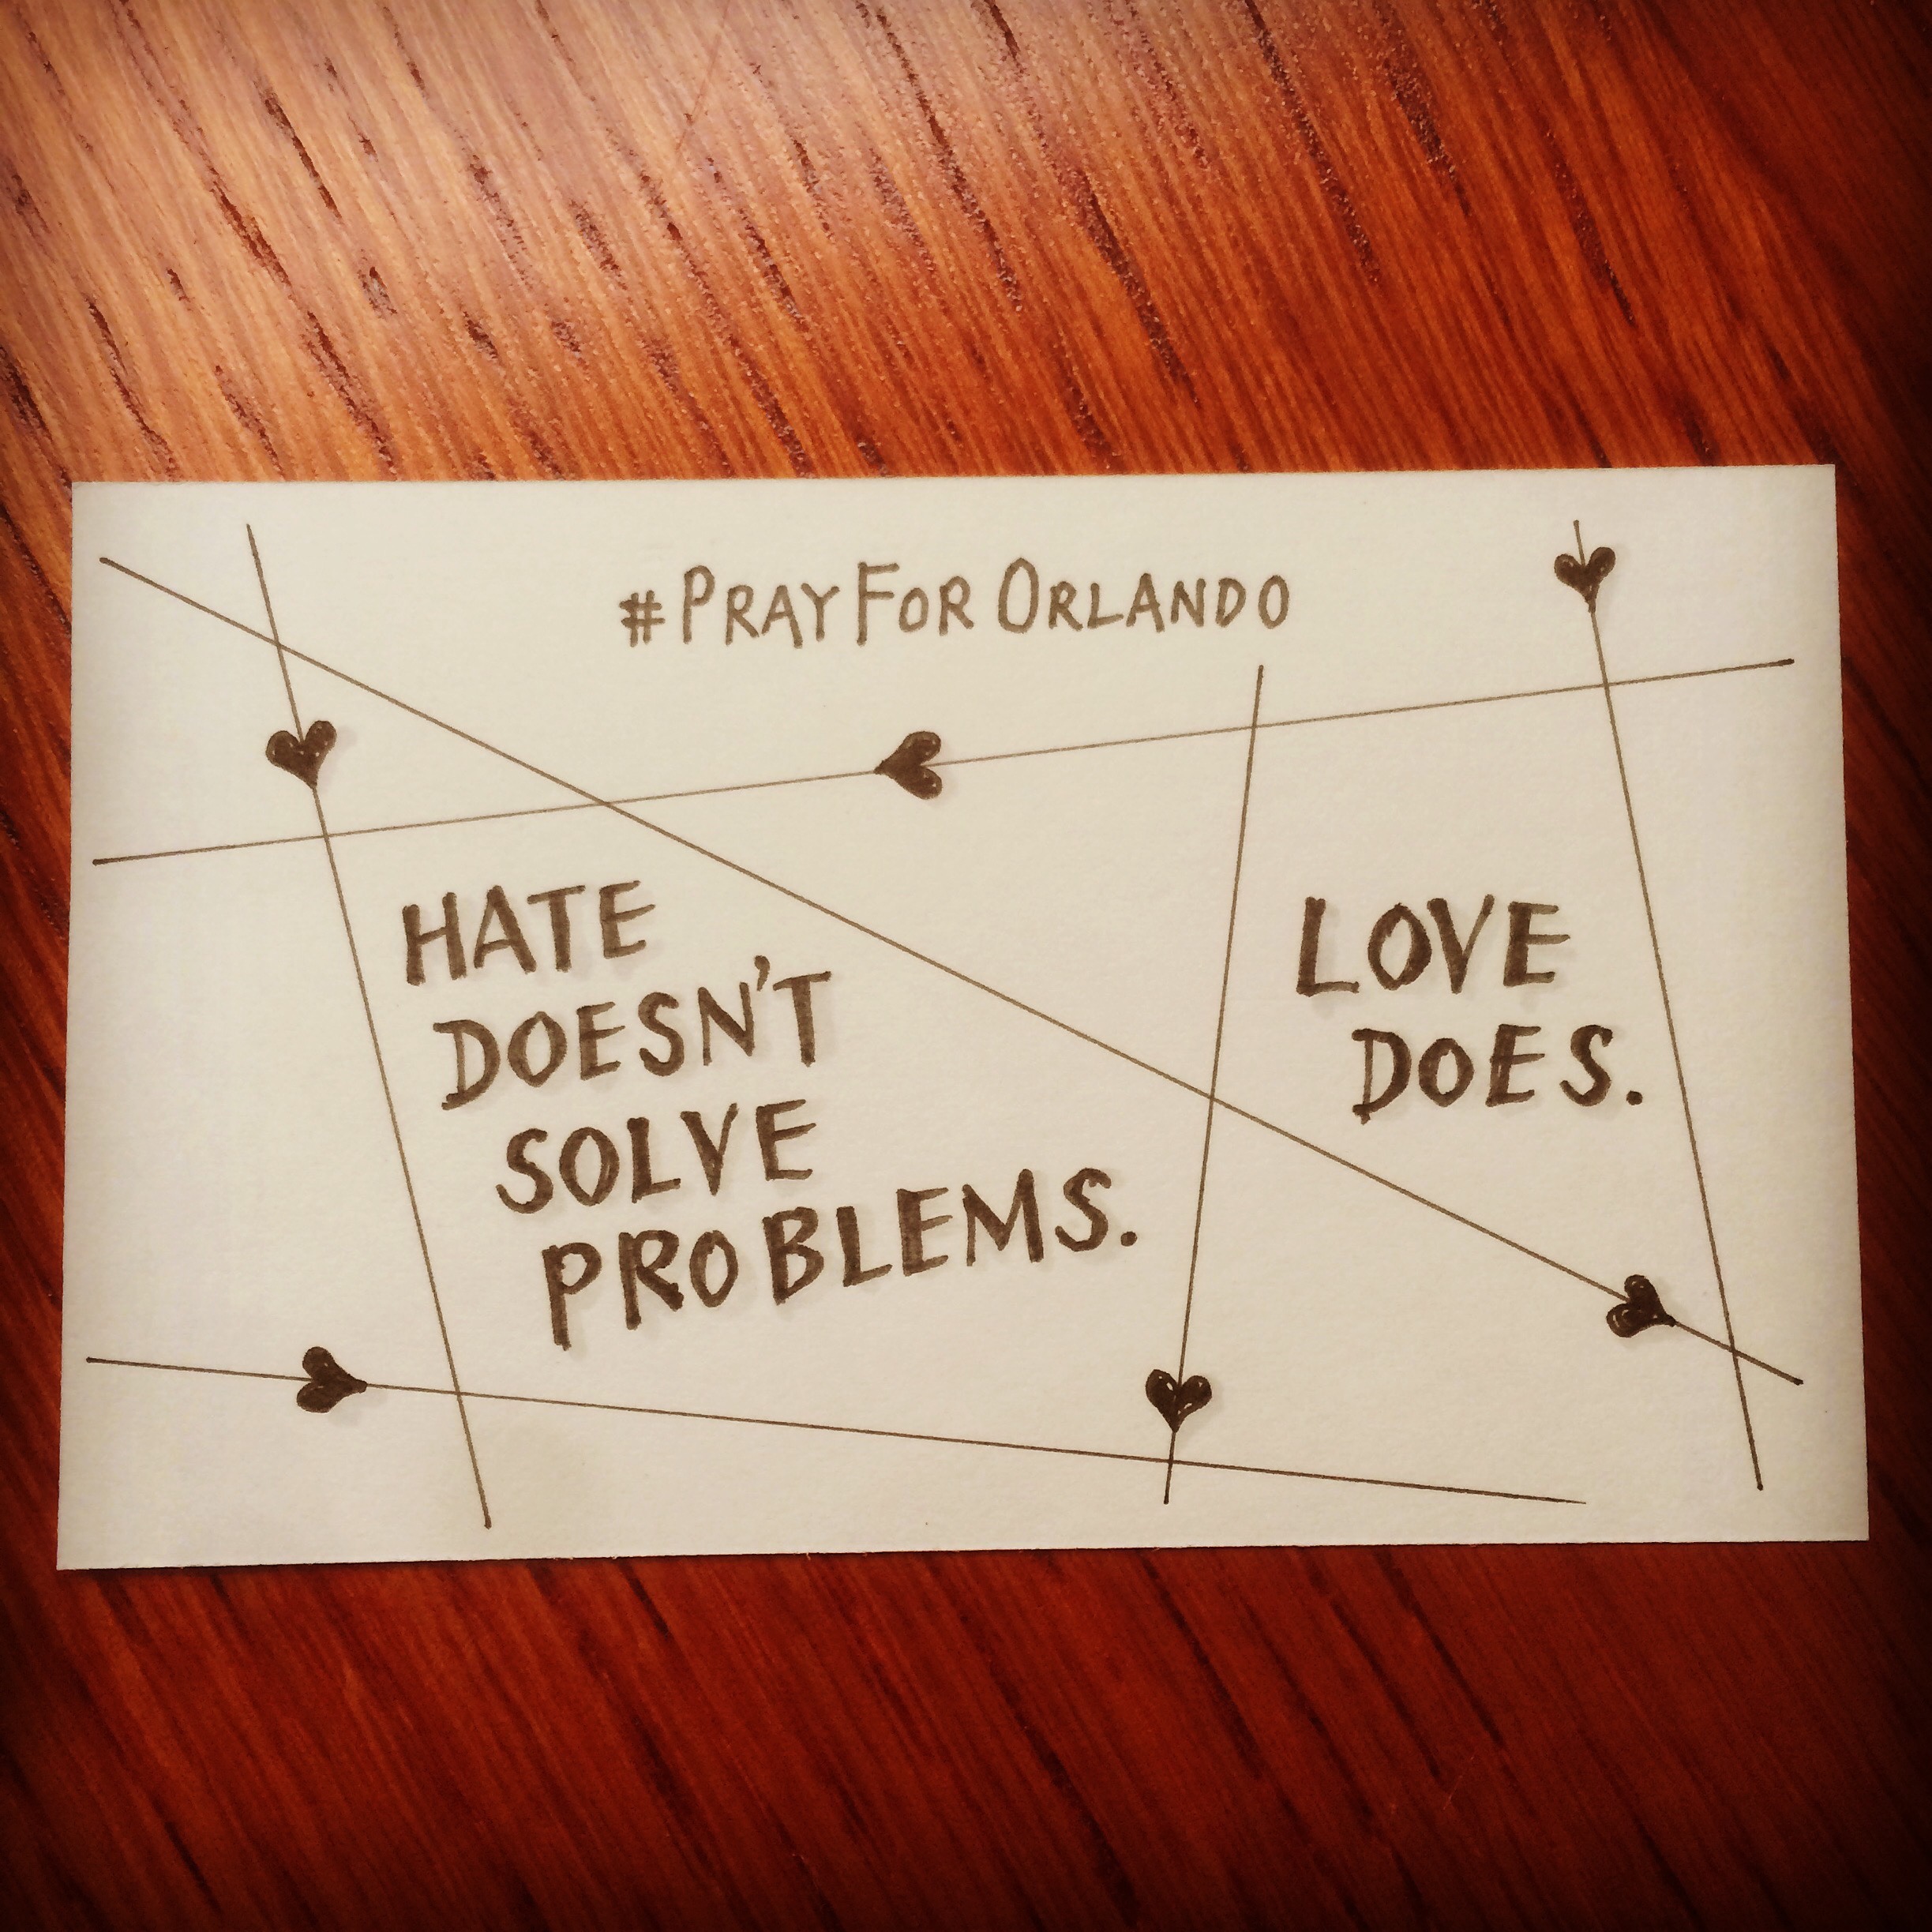 Hate doesn't solve problems. Love does.